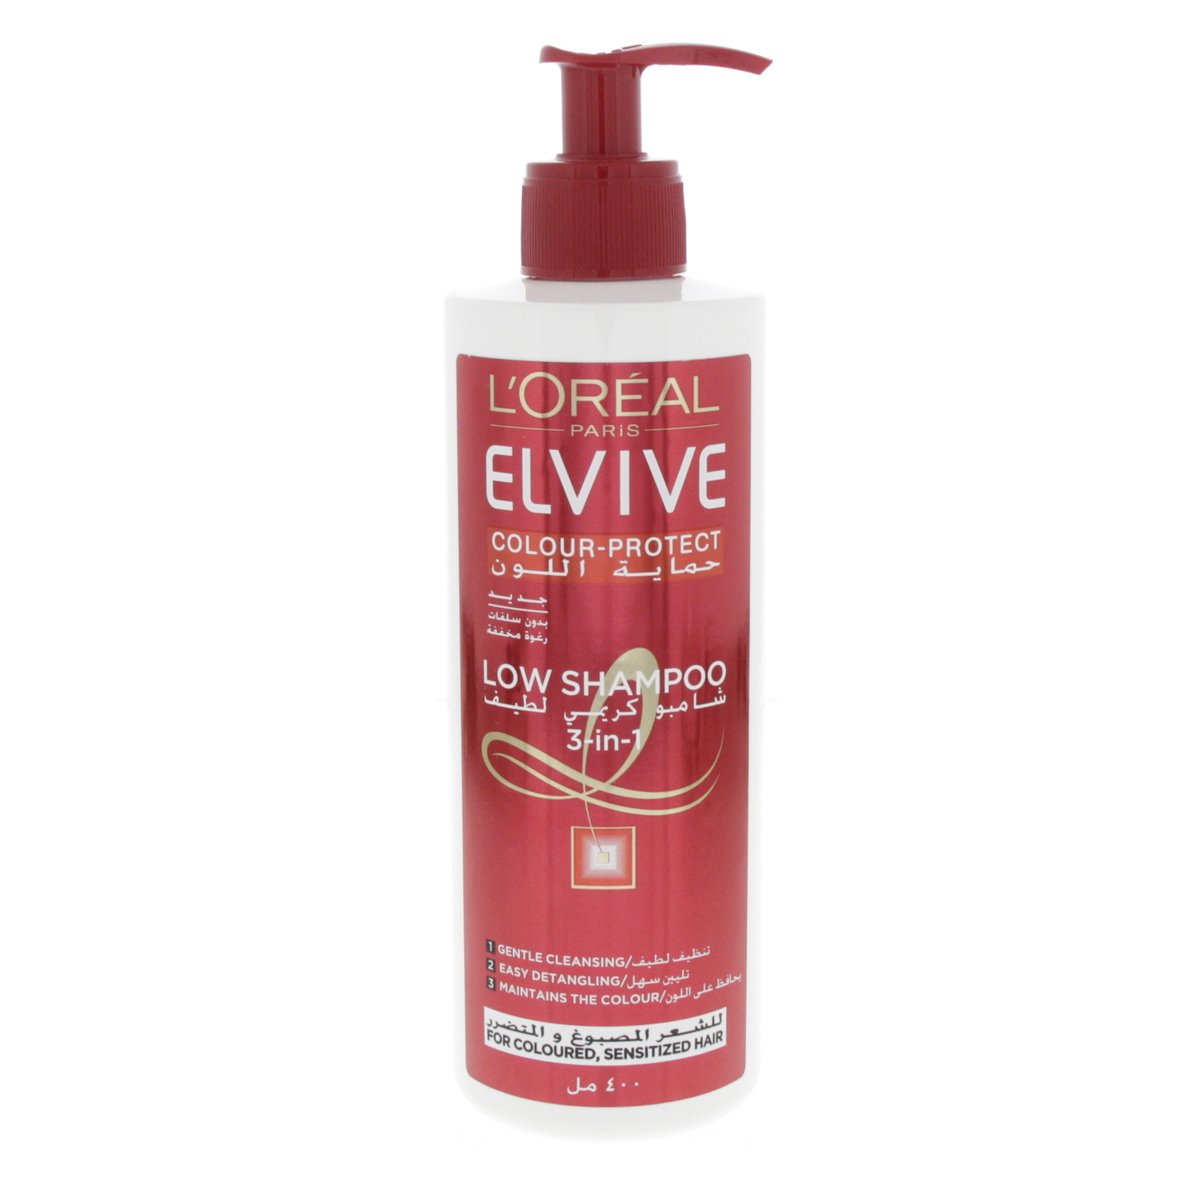 L'Oreal Elvive Colour Protect 3 in 1 Low Shampoo 400 ml